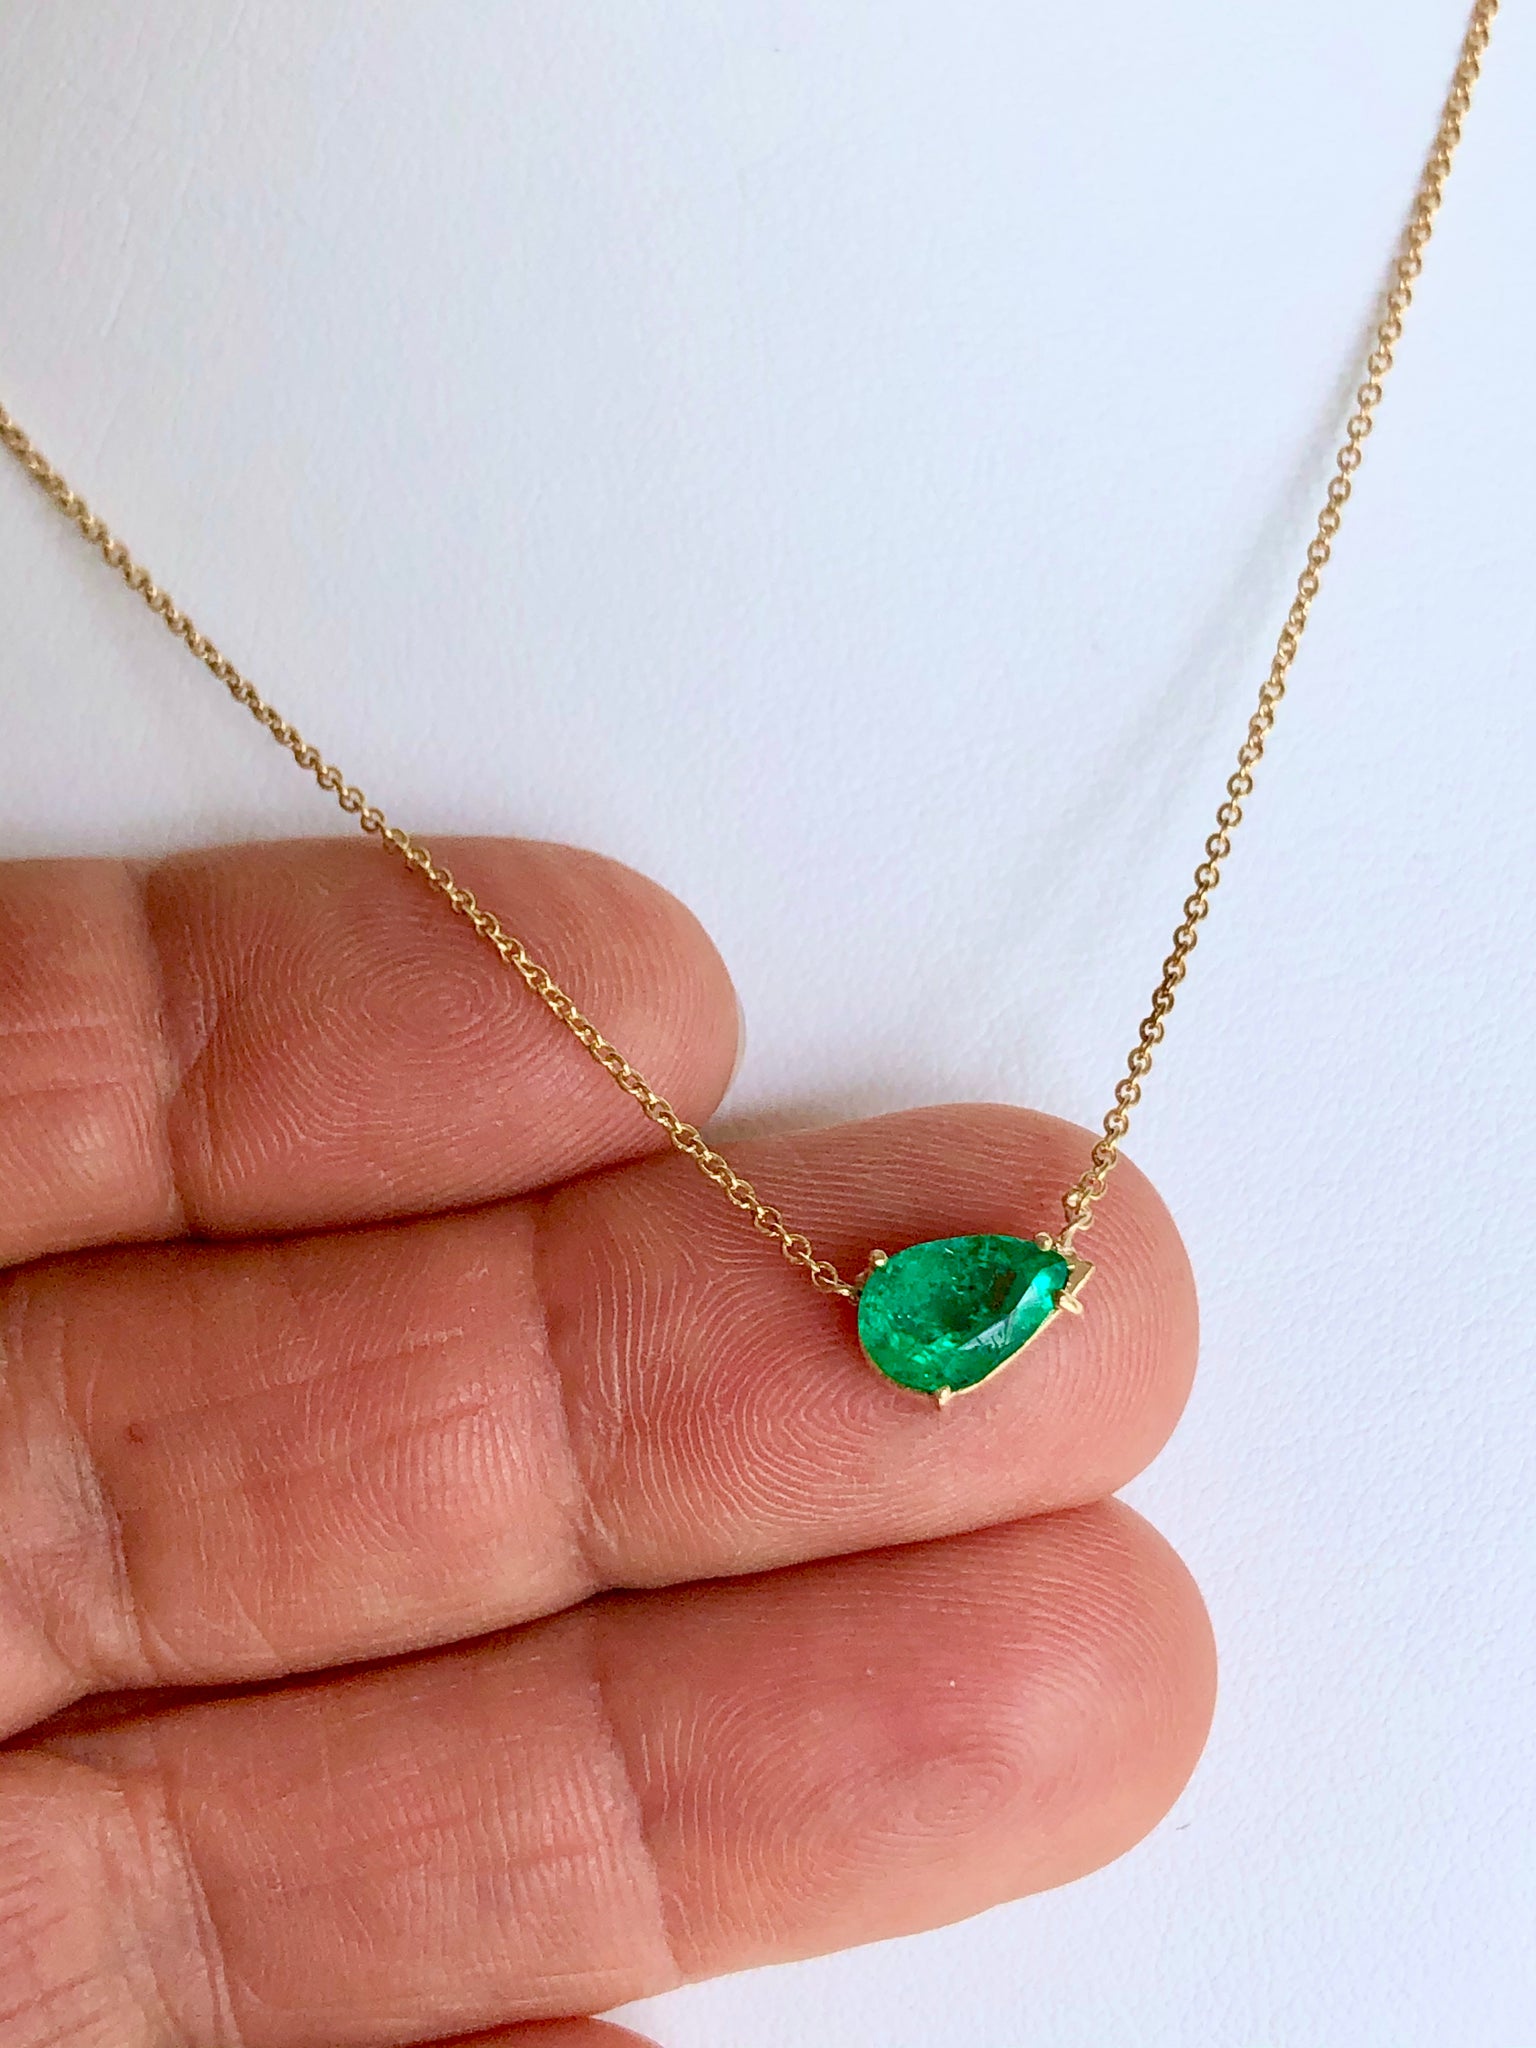 Pear Shape Colombian Emerald Solitaire Pendant Drop Necklace in 18K